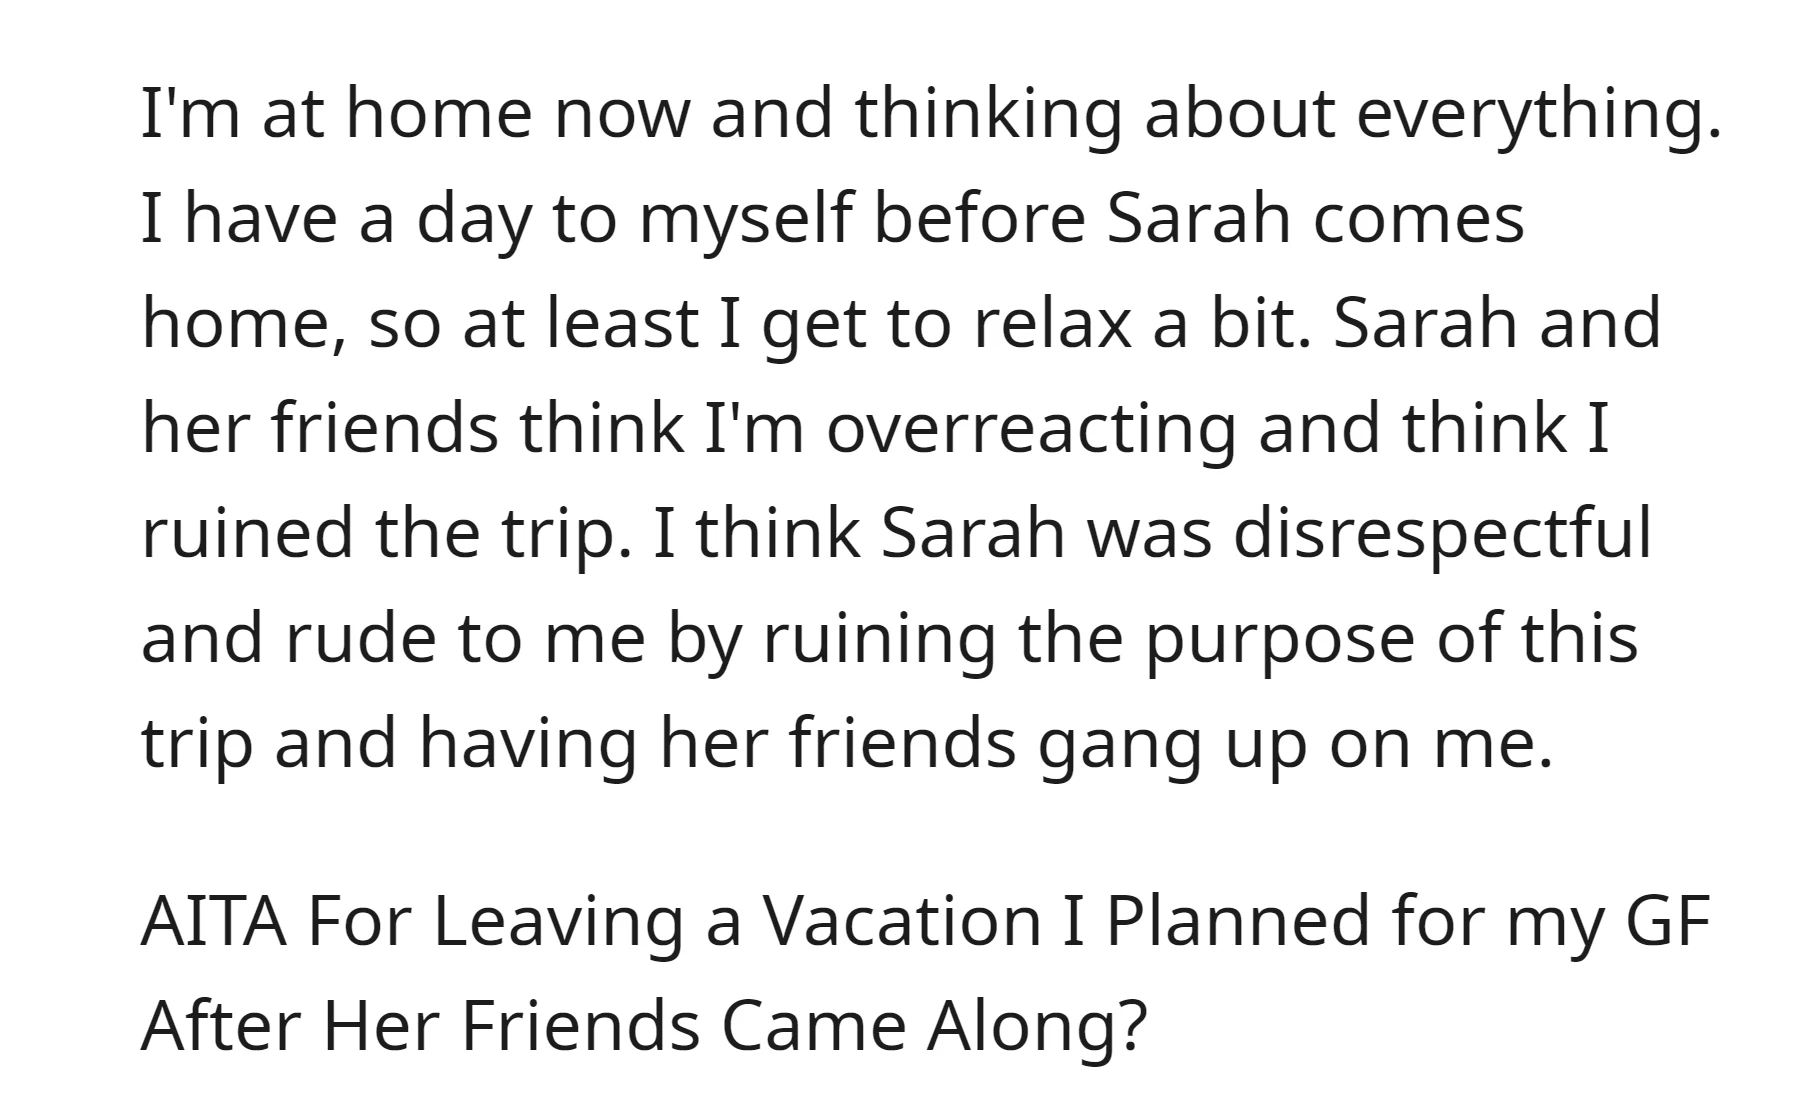 OP is questioning whether he is in the wrong for leaving the vacation he planned for his girlfriend